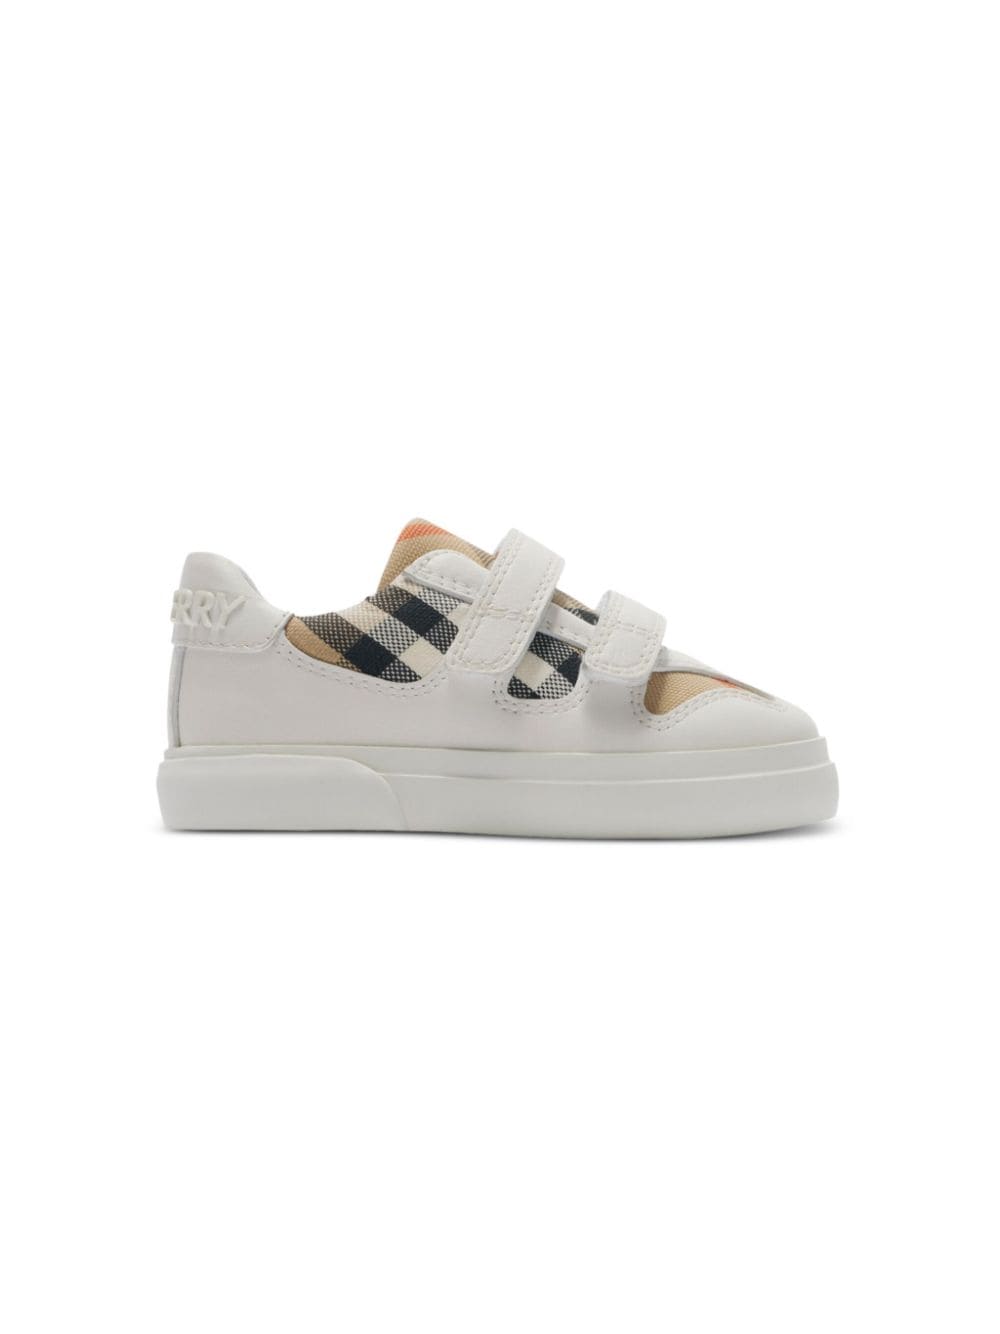 Burberry Kids Checked leather sneakers - White von Burberry Kids